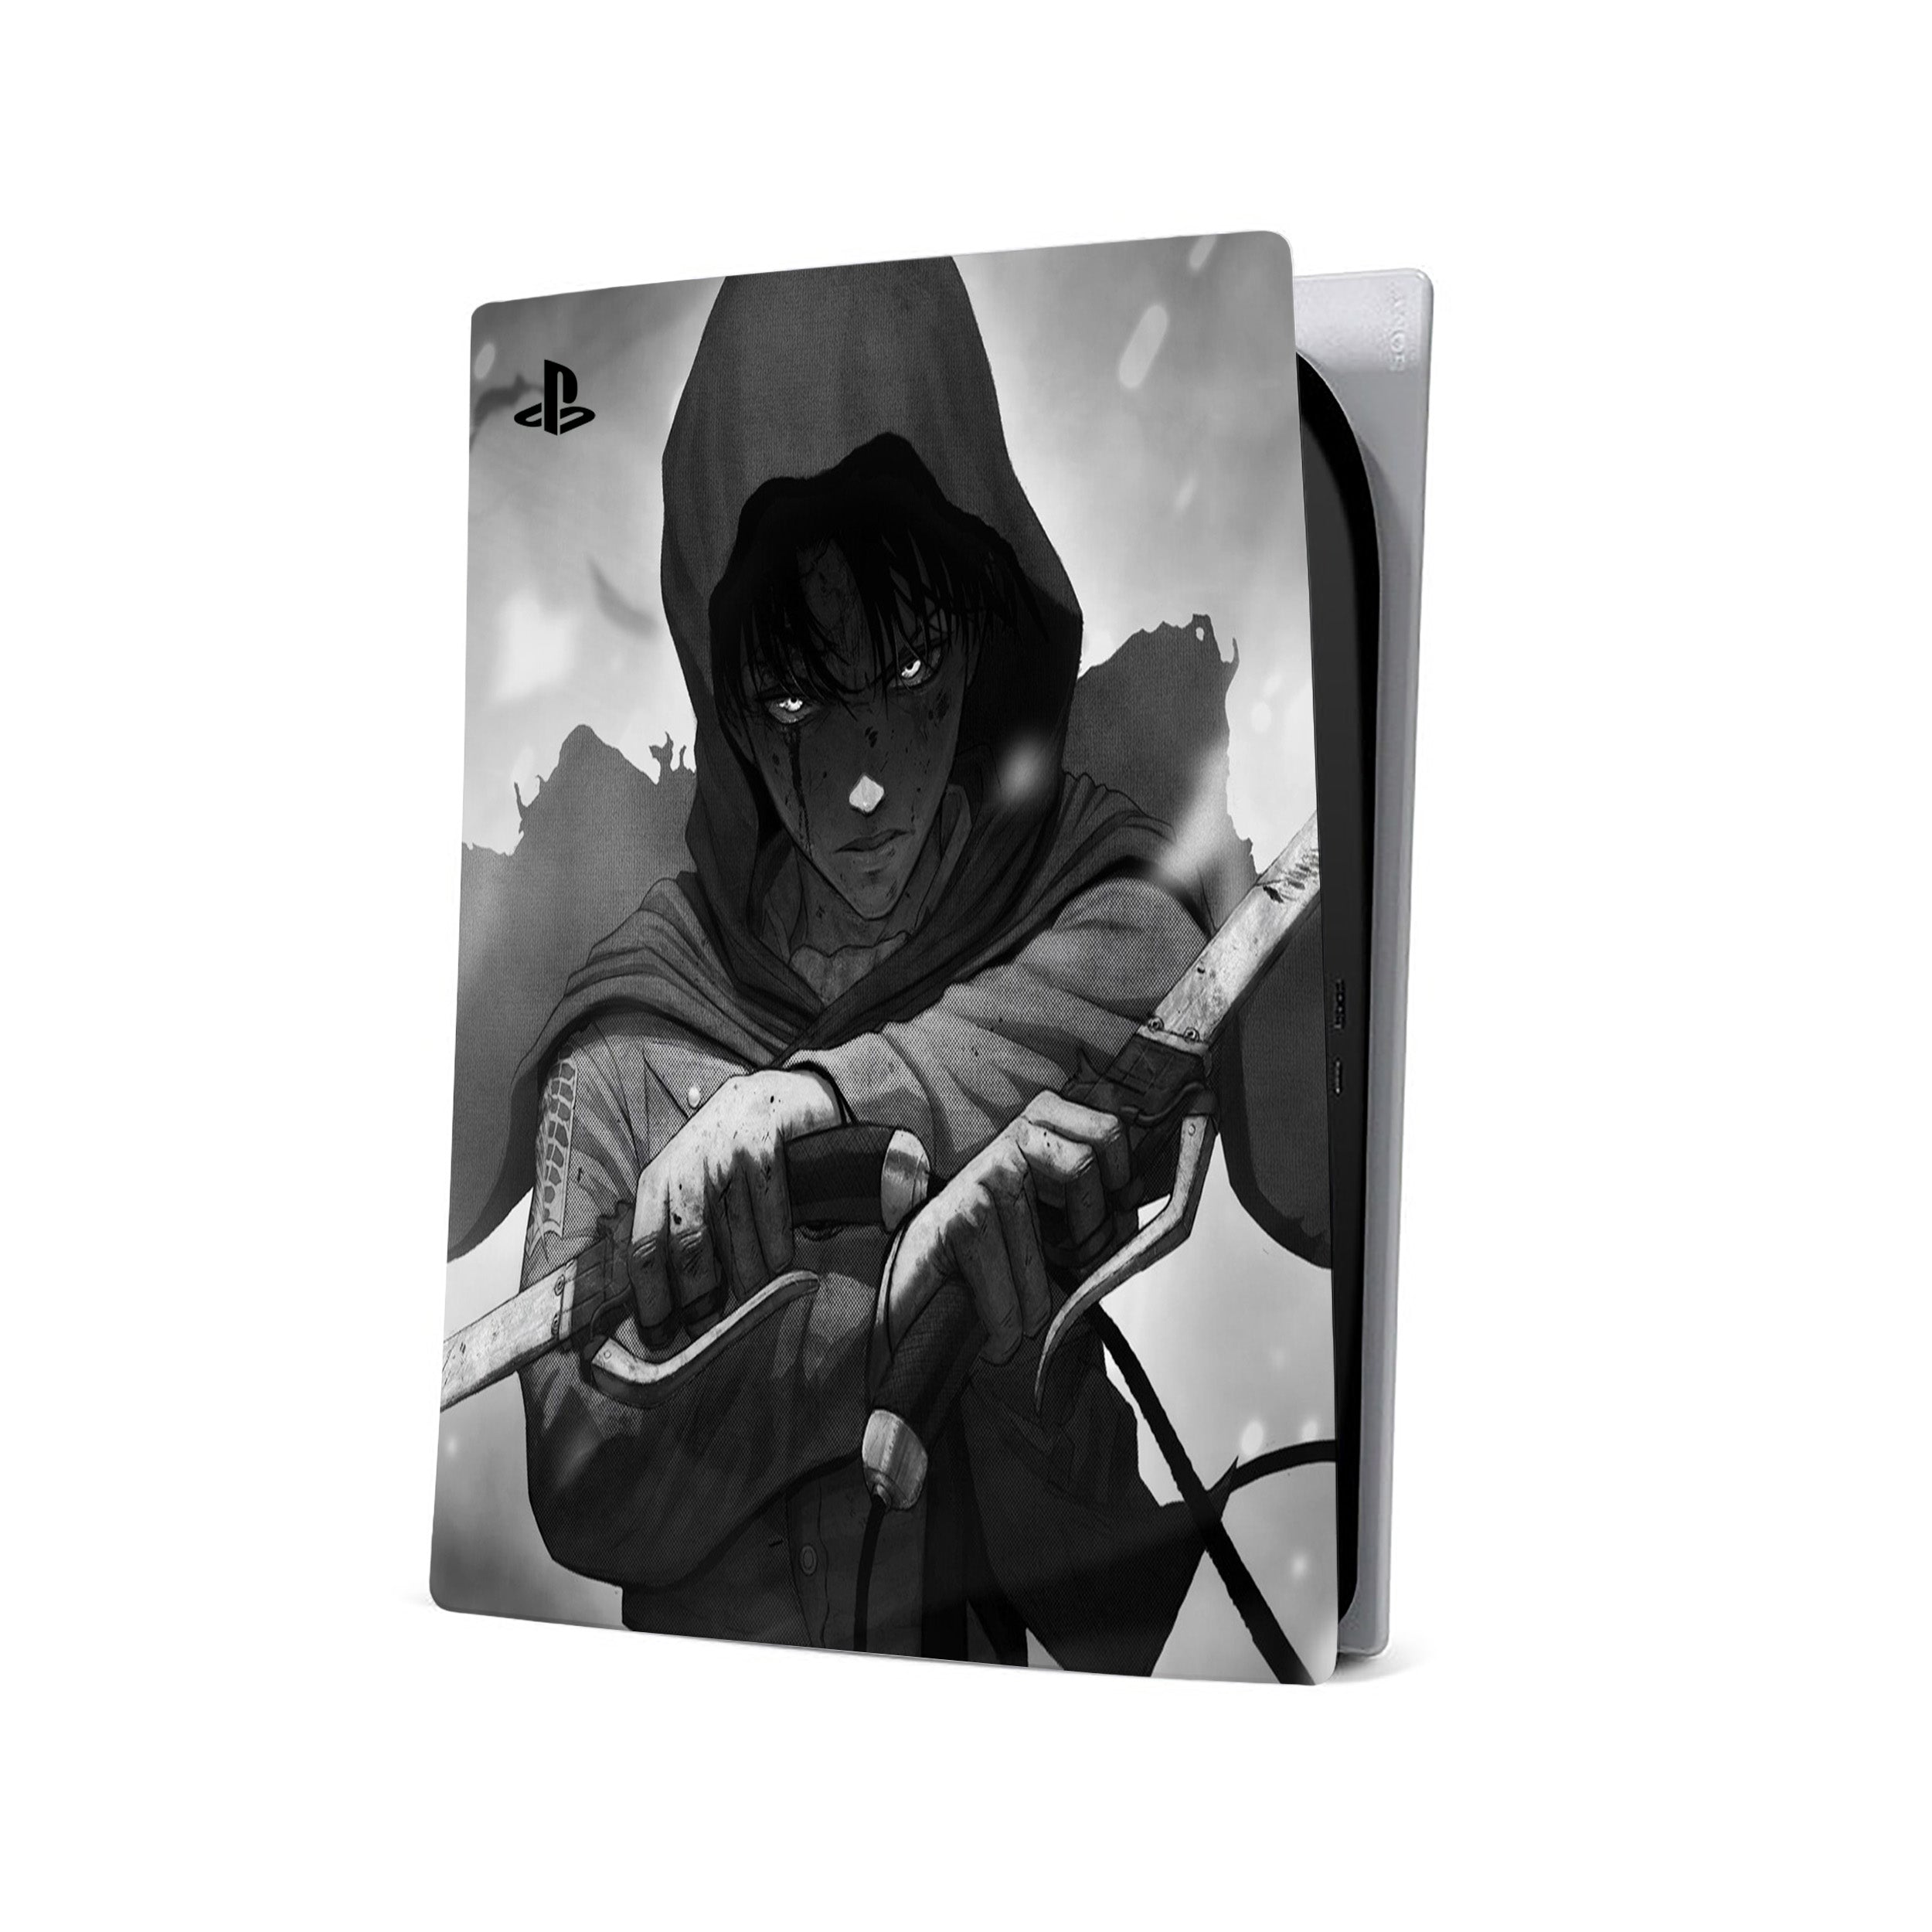 A video game skin featuring a Attack On Titan Levi Ackerman design for the PS5.